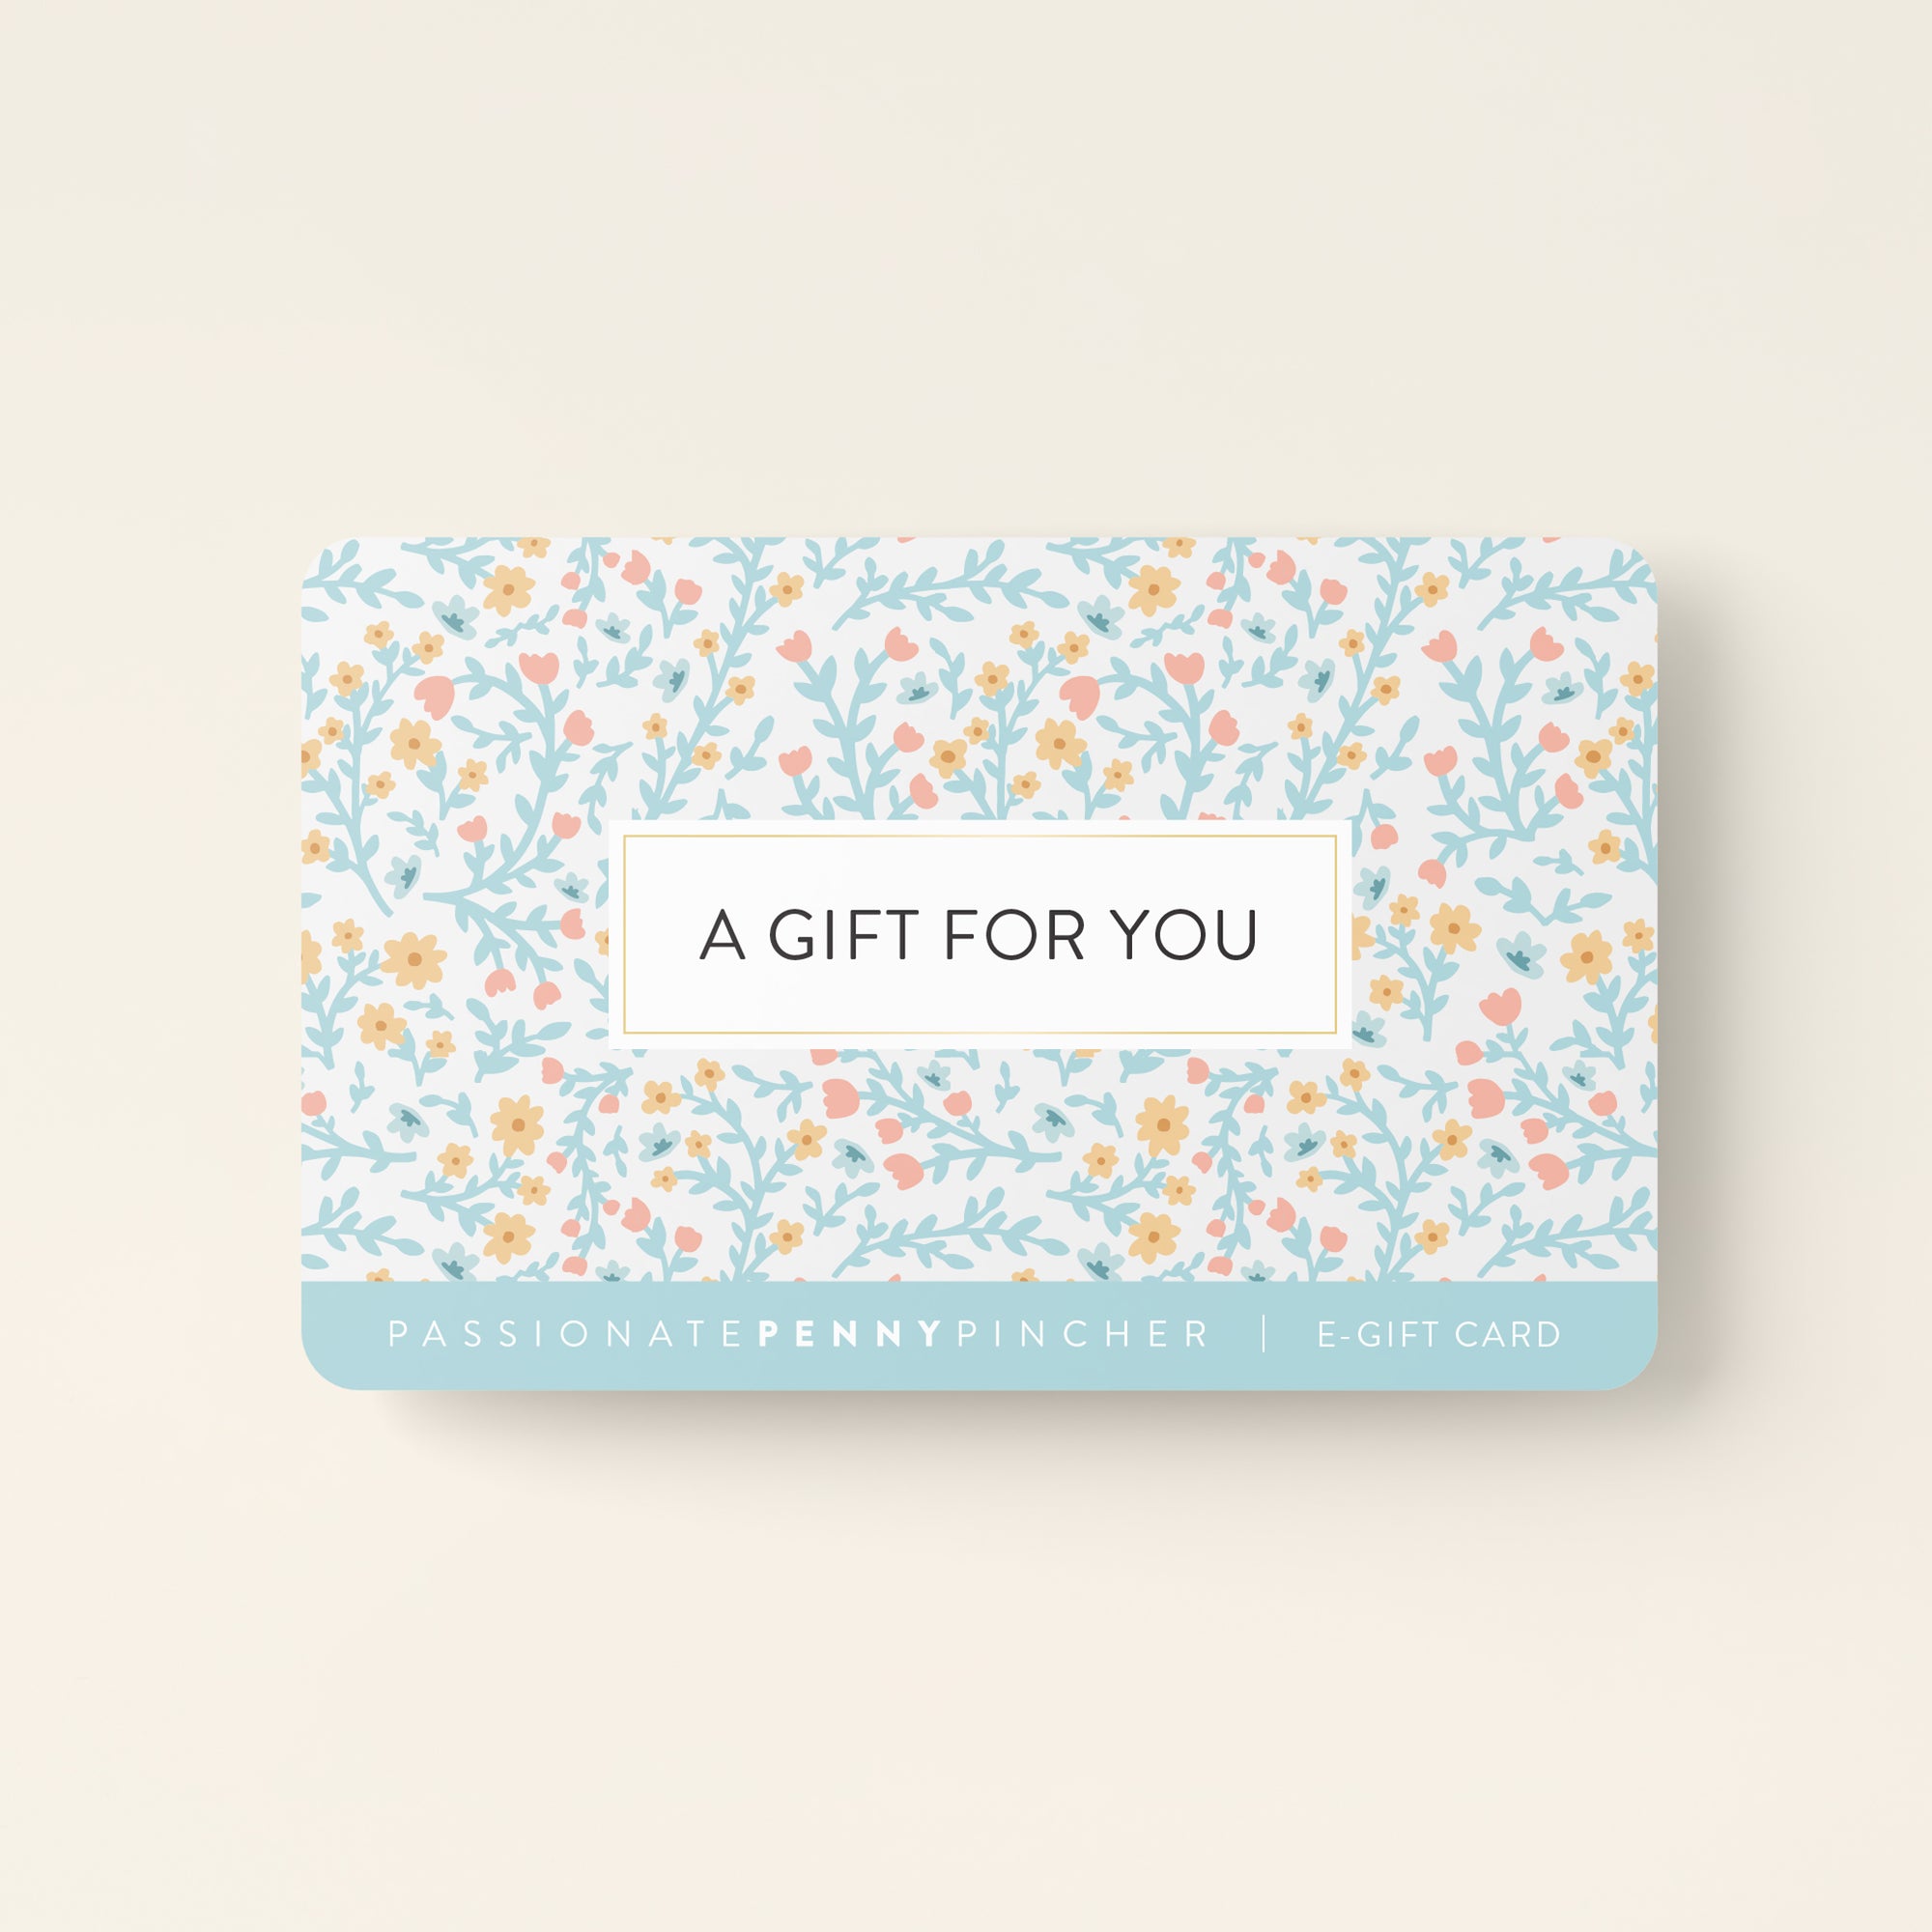 Passionate Penny Pincher Shop E-Gift Card